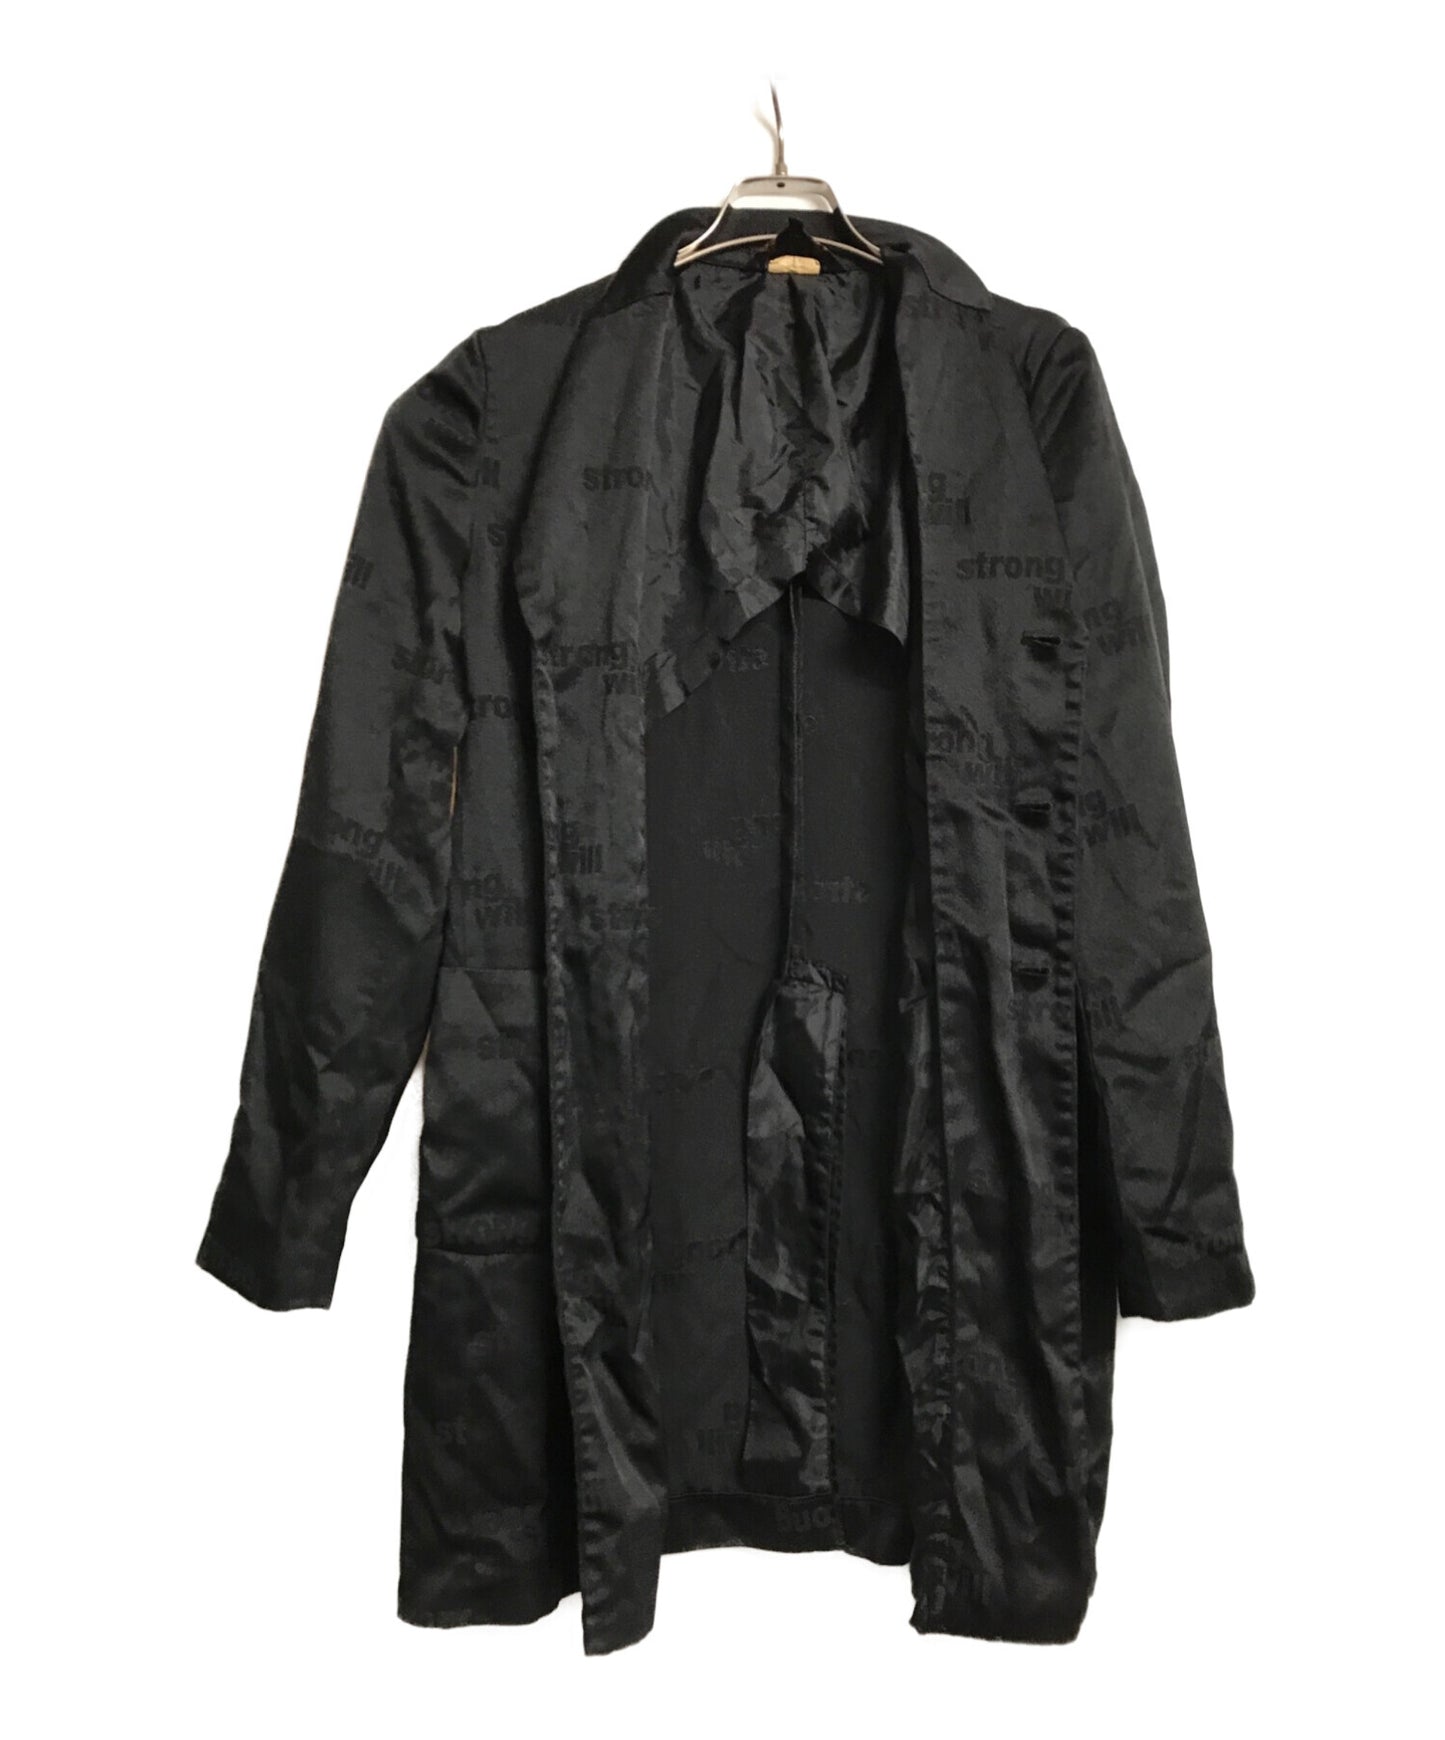 Black Comme des Garcons Strong will all-over 패턴 긴 재킷 1d-J021